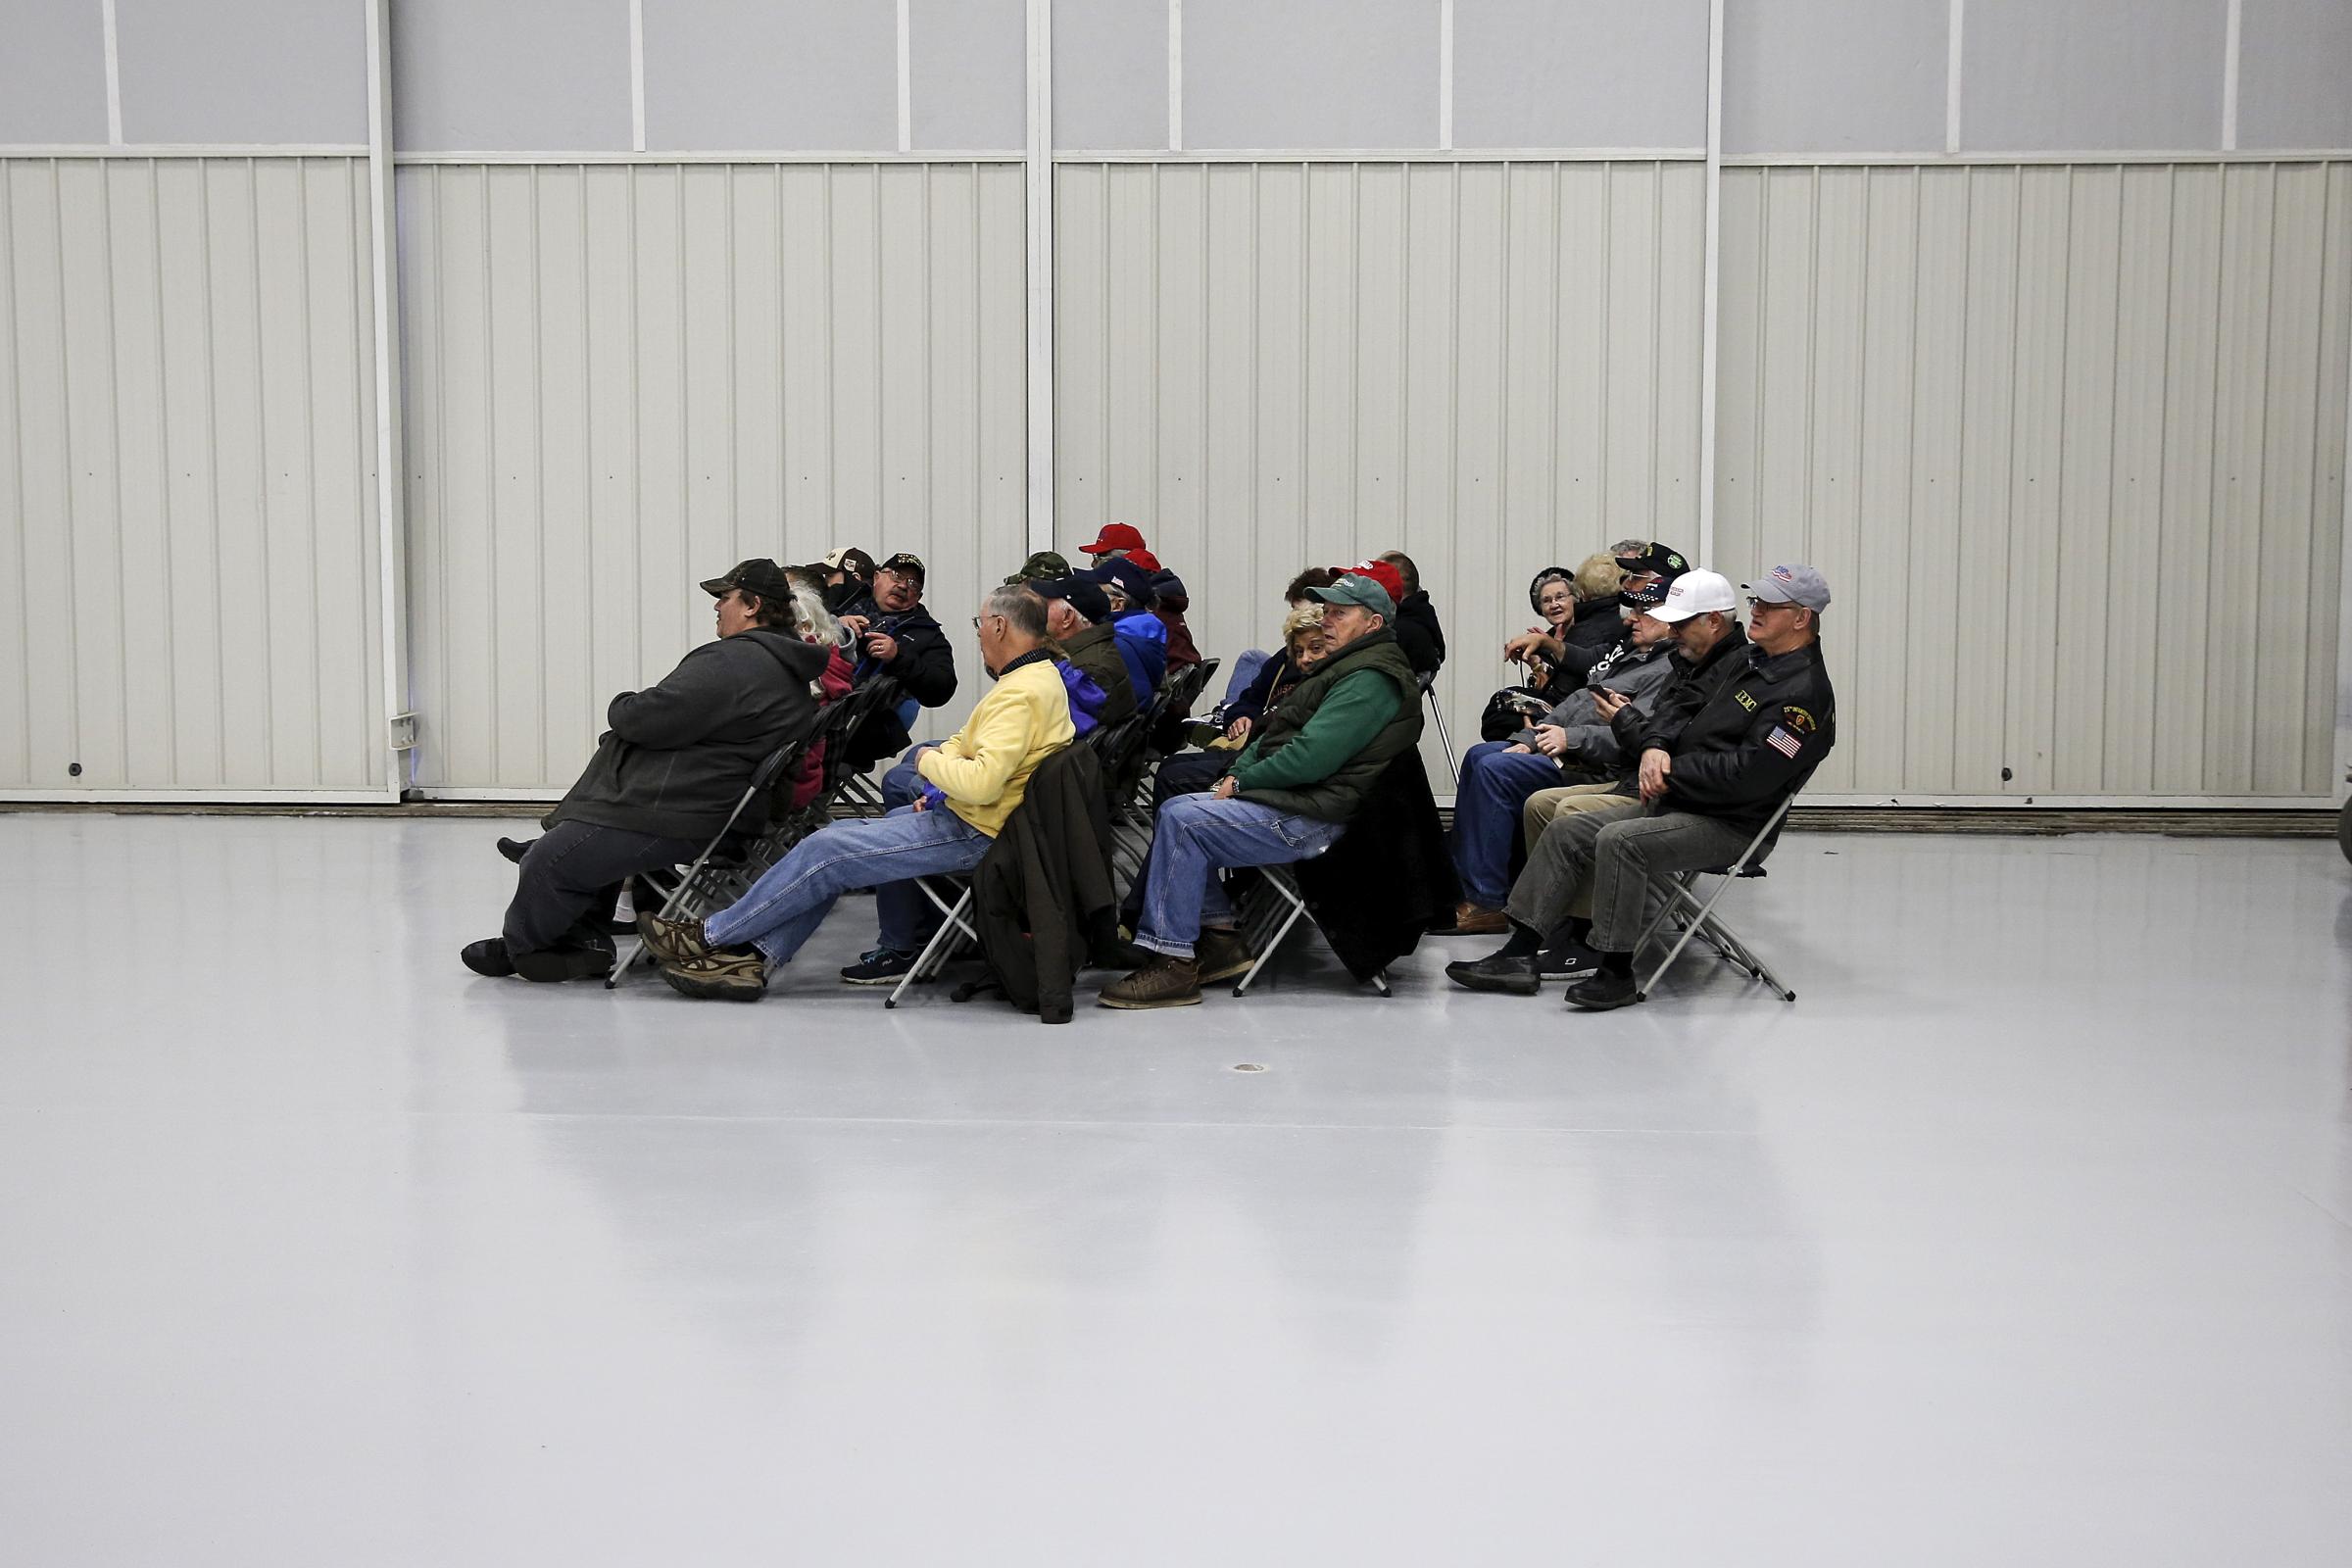 A group of people fill a seated area before U.S. Republican presidential candidate Donald Trump speaks at a campaign event in an airplane hangar in Rome, New York